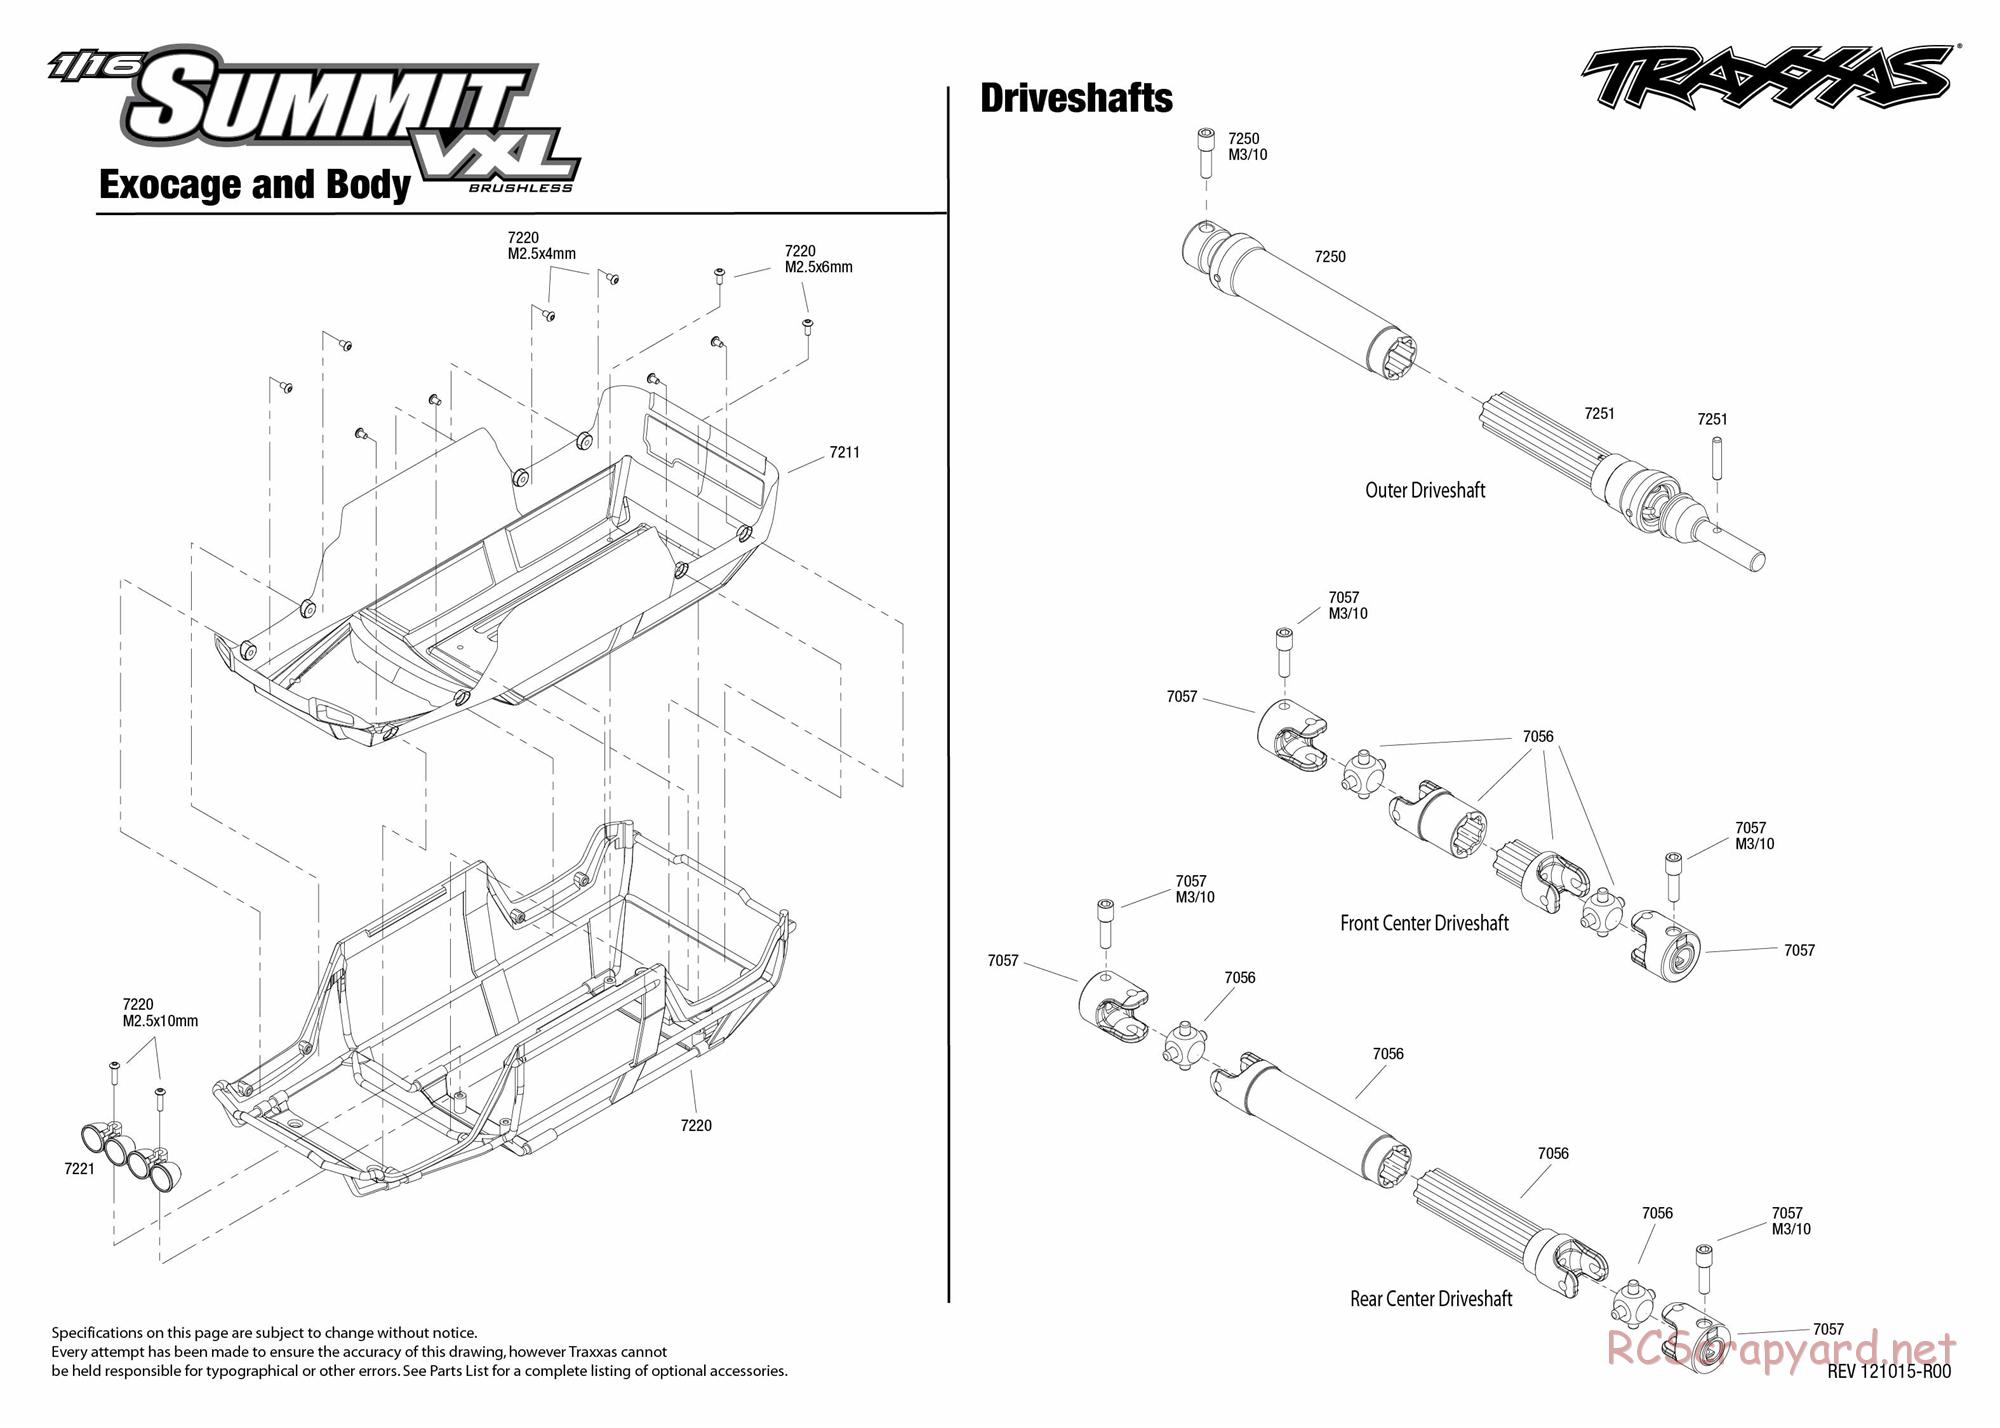 Traxxas - 1/16 Summit VXL (2012) - Exploded Views - Page 2